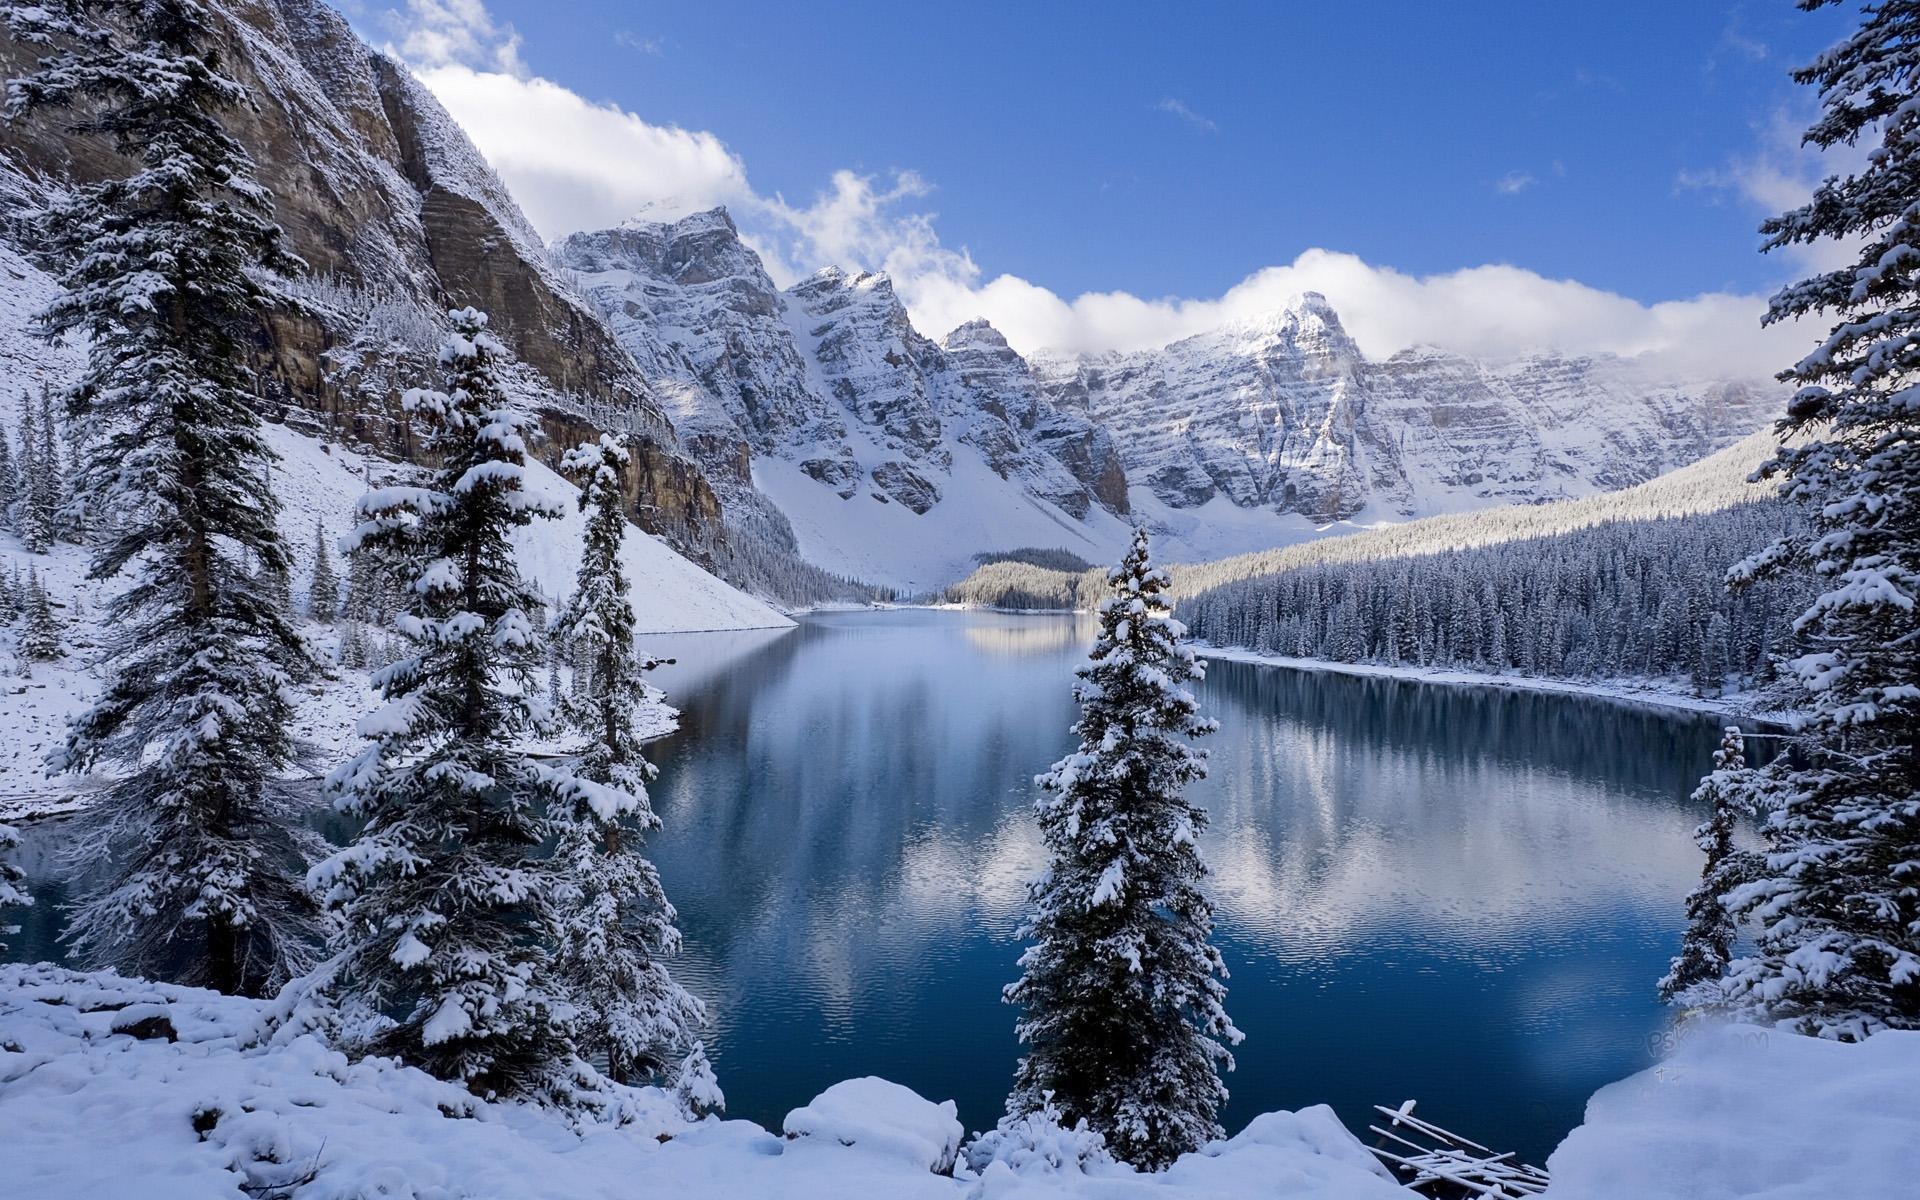 Winter, snow, mountains, lakes, trees, roads HD Wallpapers #12 - 1920x1200